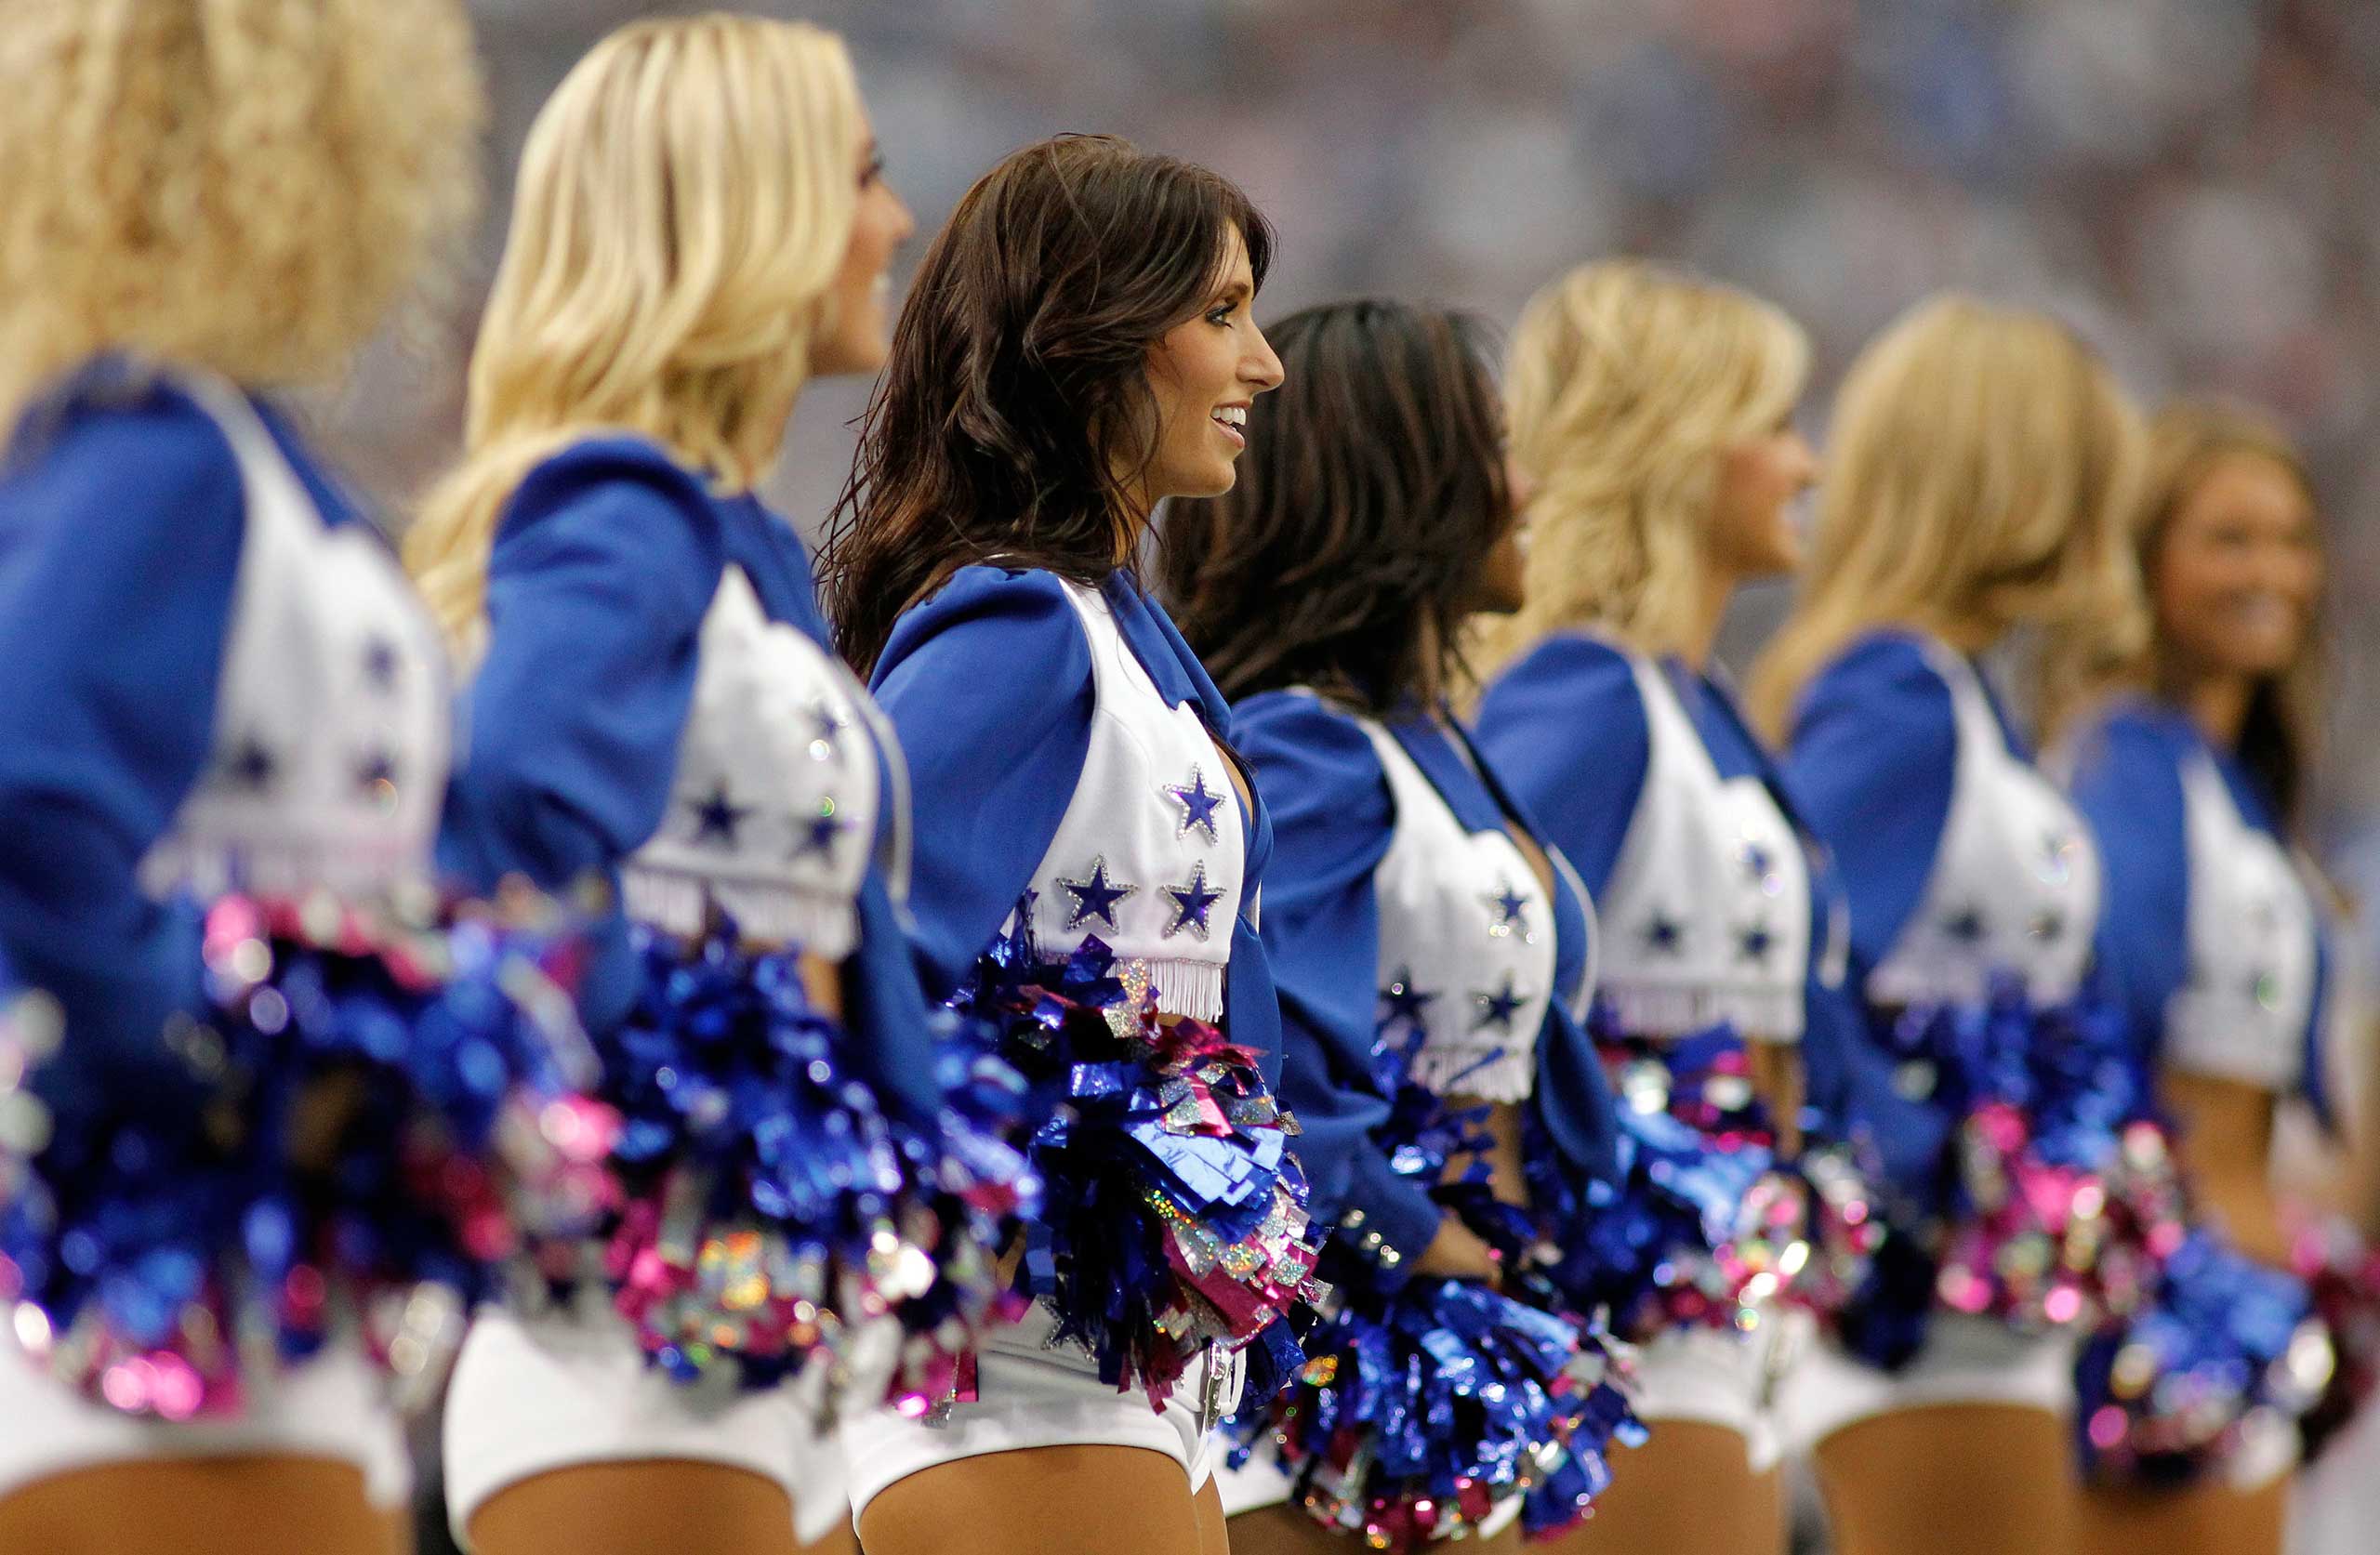 The Dallas Cowboys cheerleaders perform during the game between the Cowboys and Detroit Lions at Cowboys Stadium in Arlington, Texas.